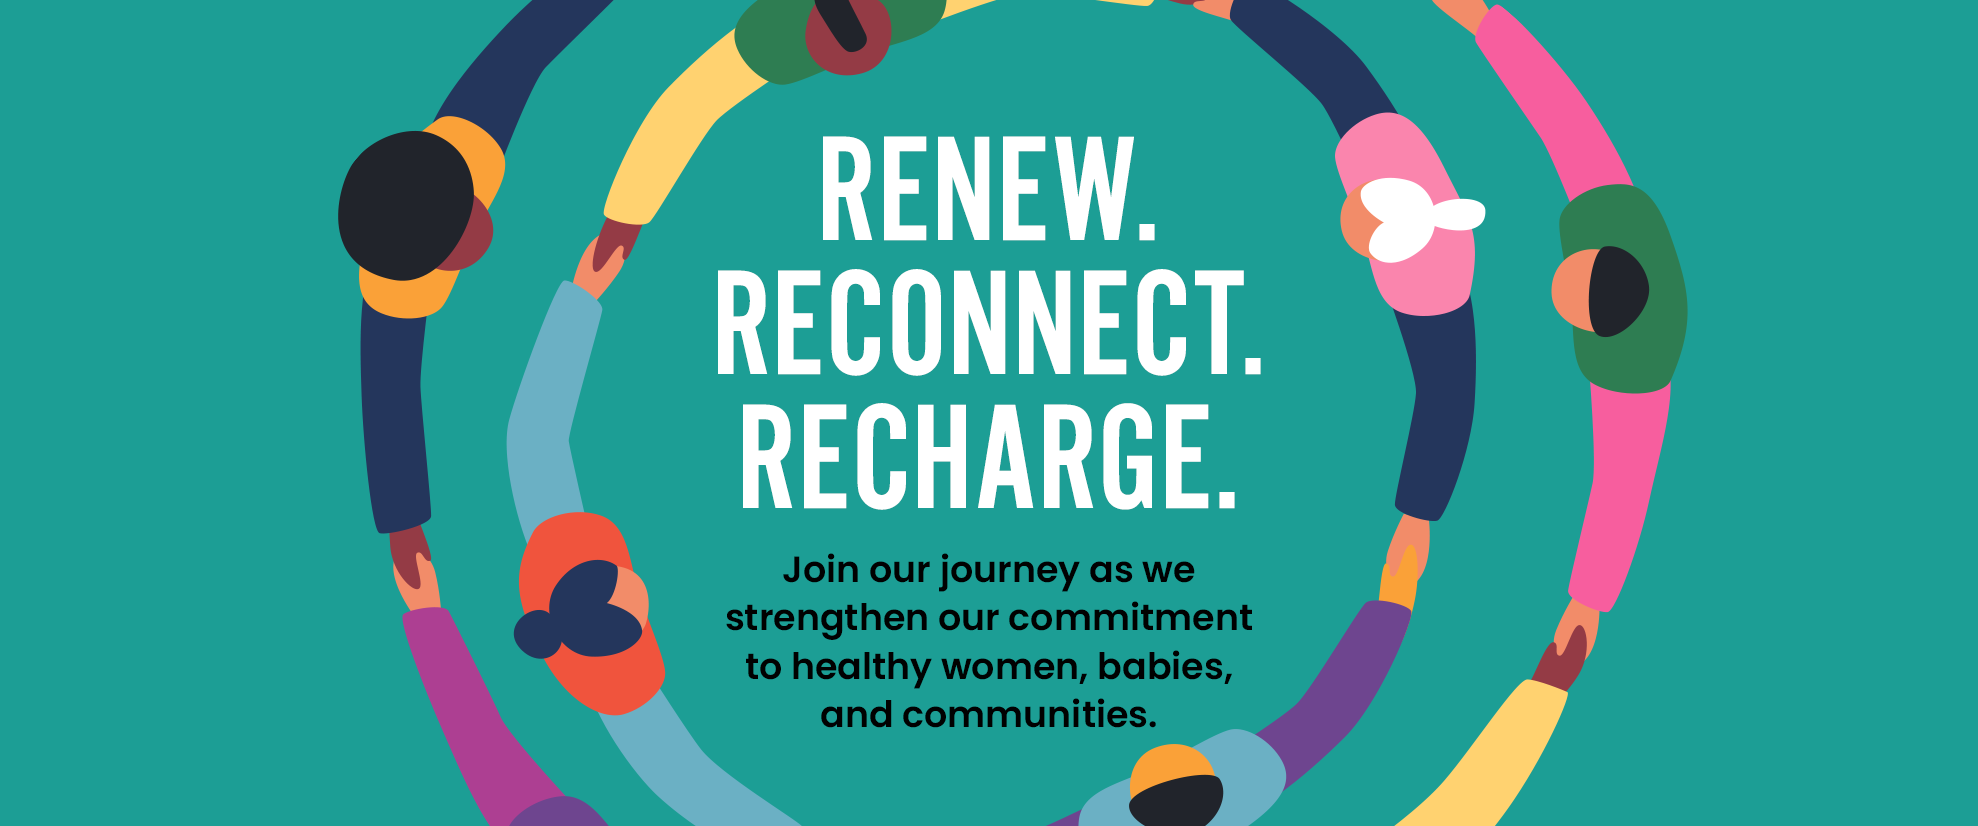 Renew. Reconnect. Recharge.